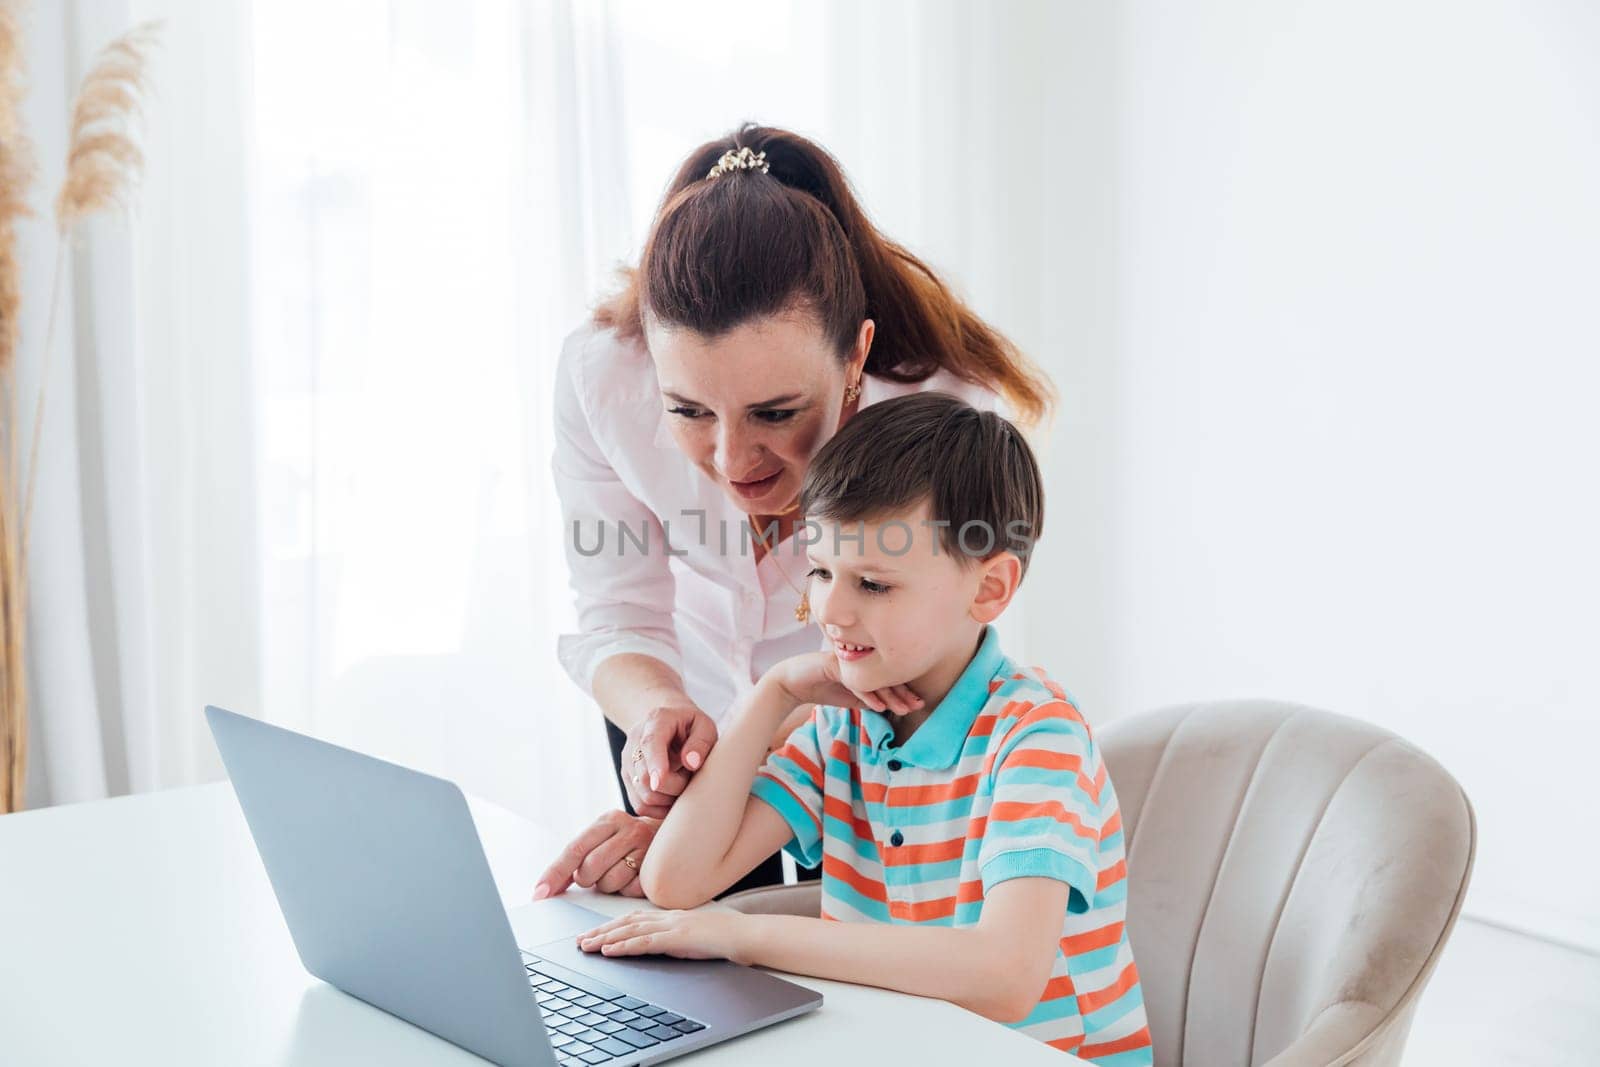 Mom helps her son do school assignment on computer